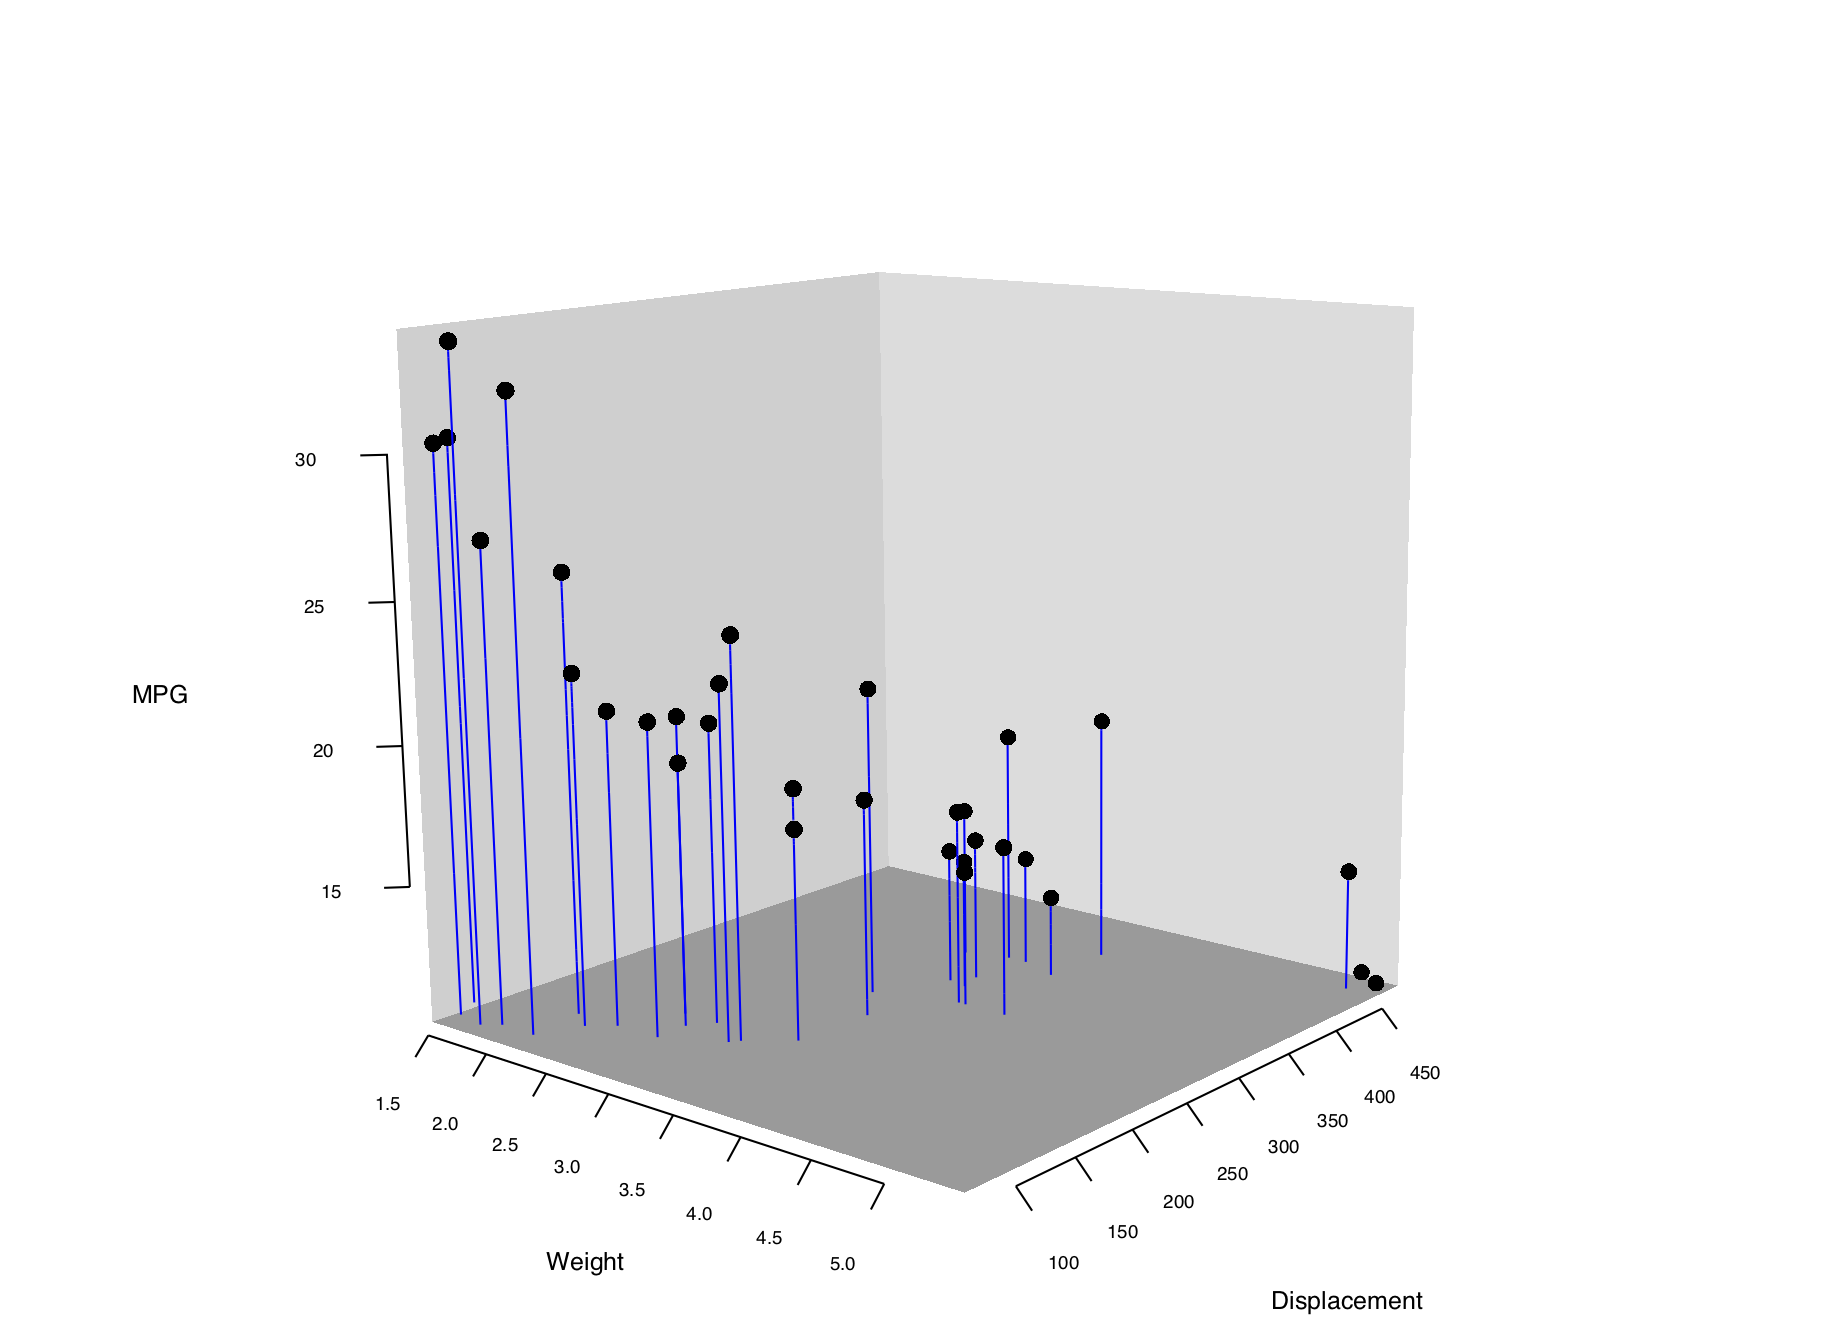 3D scatter plot with axis ticks and labels repositioned